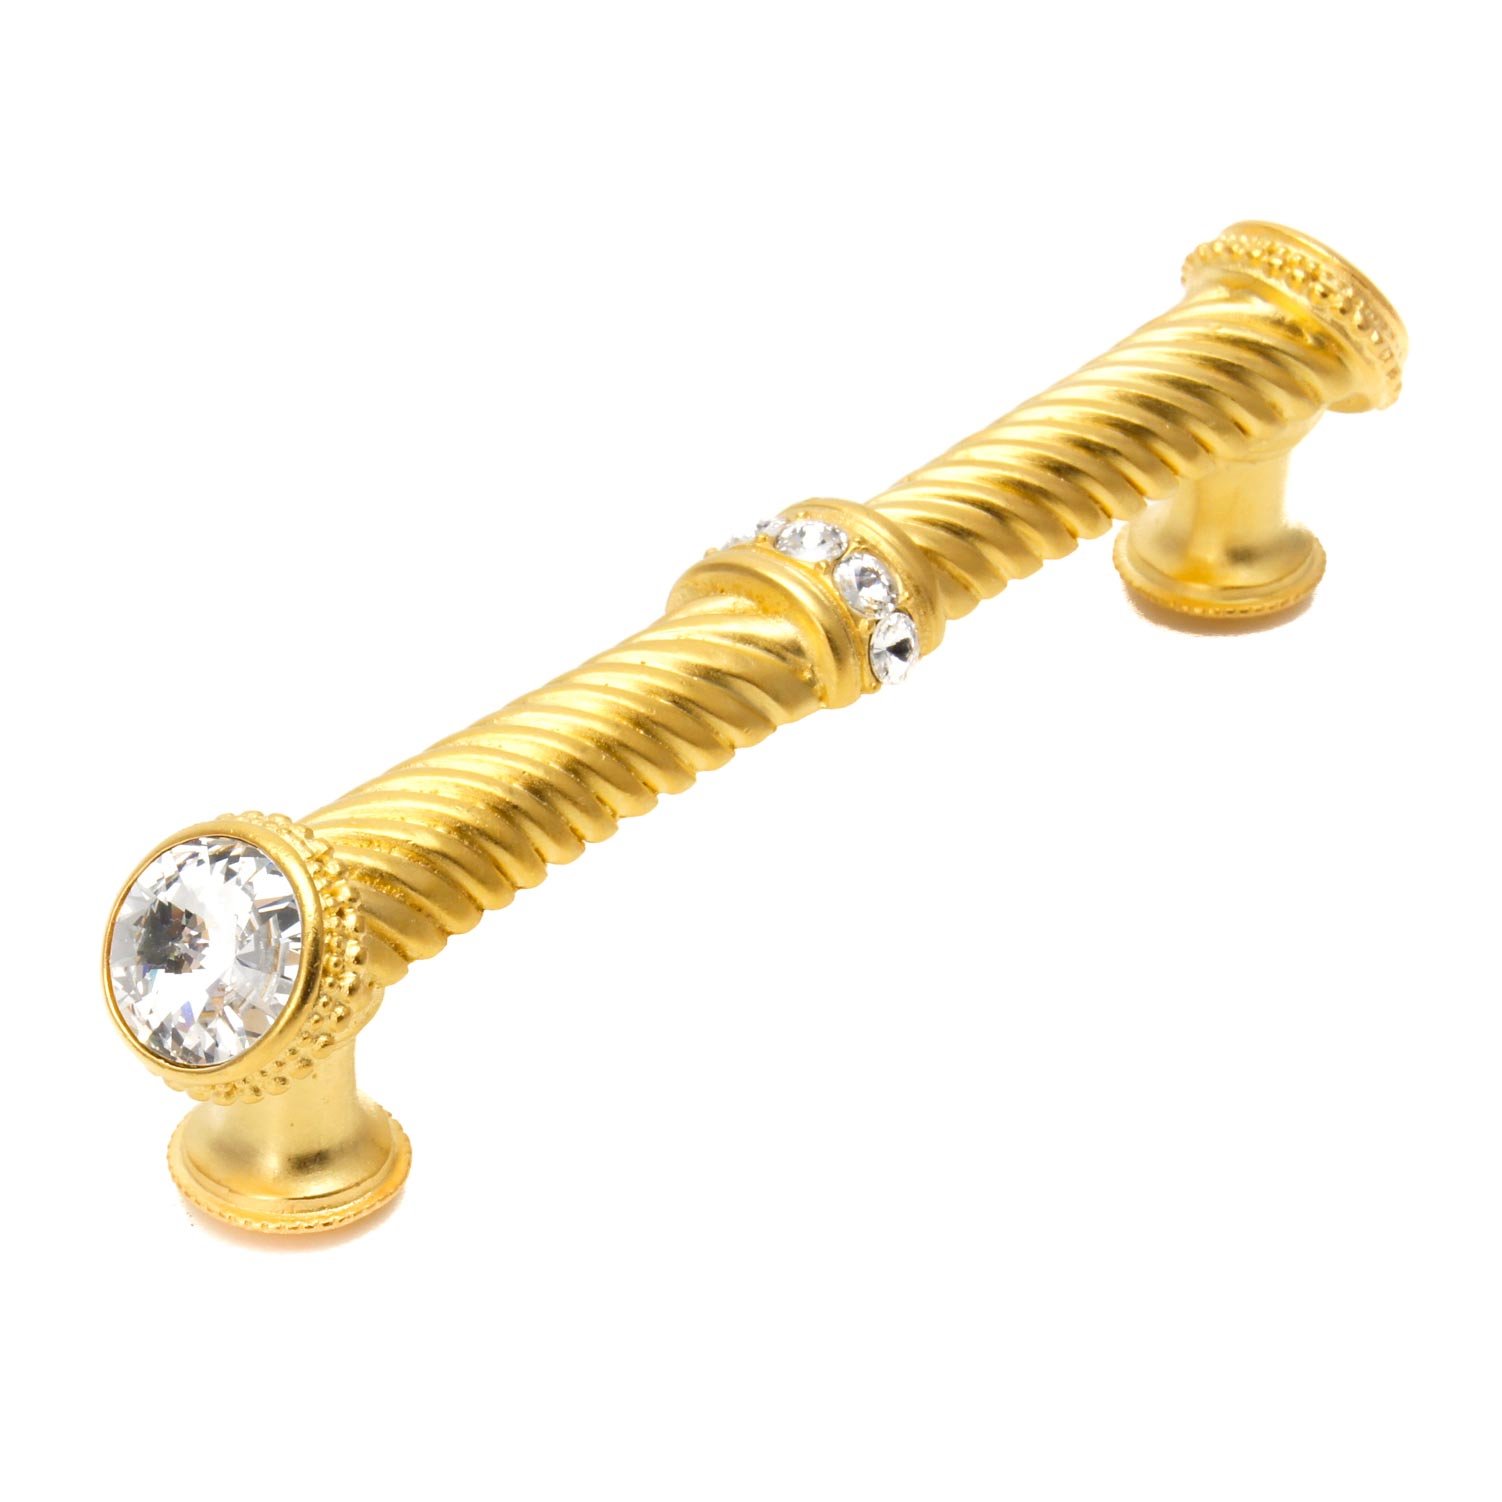 Caché 5" Centers Large Pull With End & Center Swarovski Crystals in Jet with Aurora Borealis